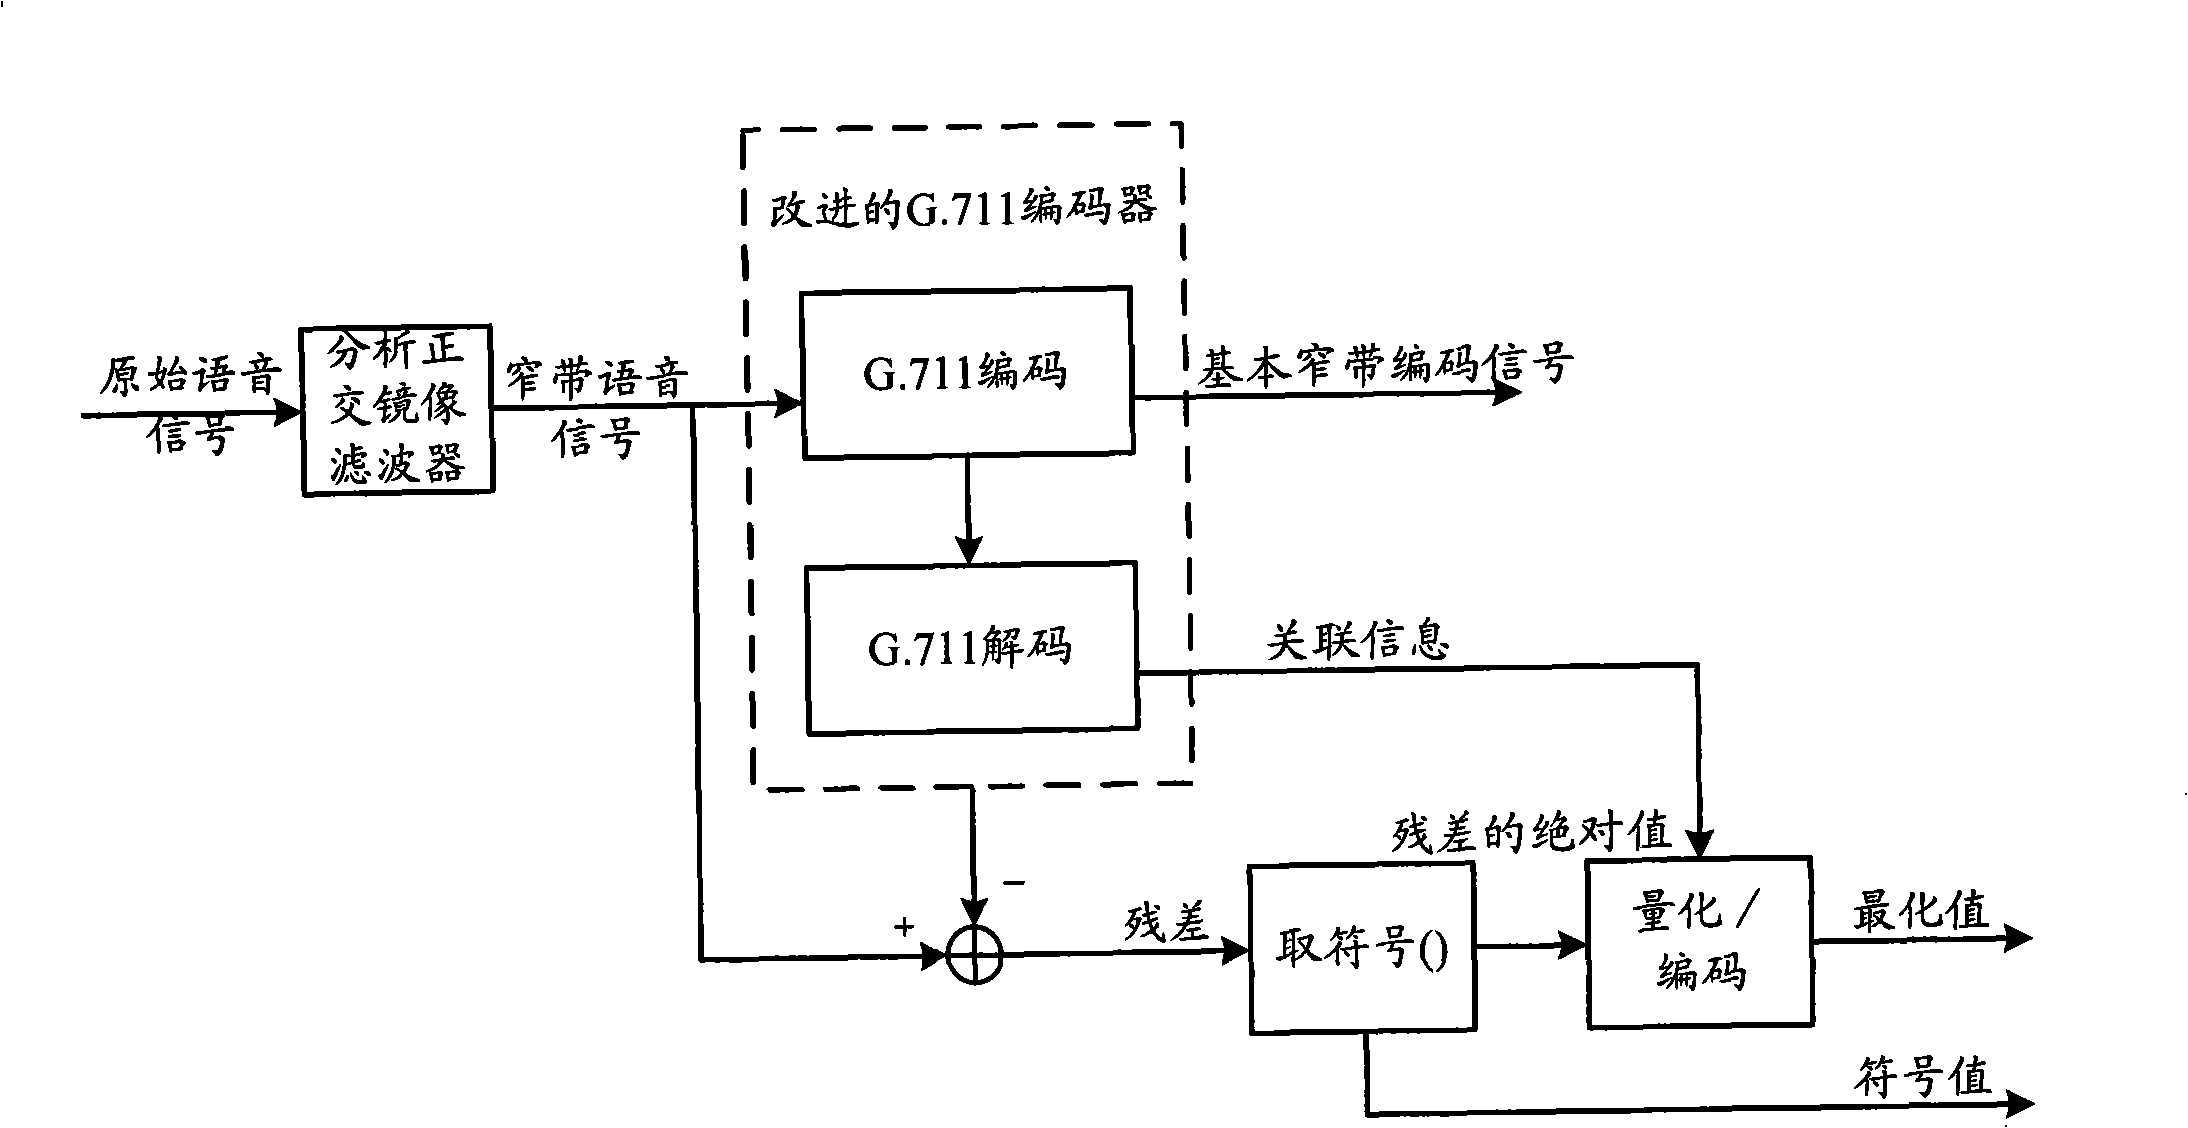 Method and apparatus for transmitting and receiving encoding-decoding speech